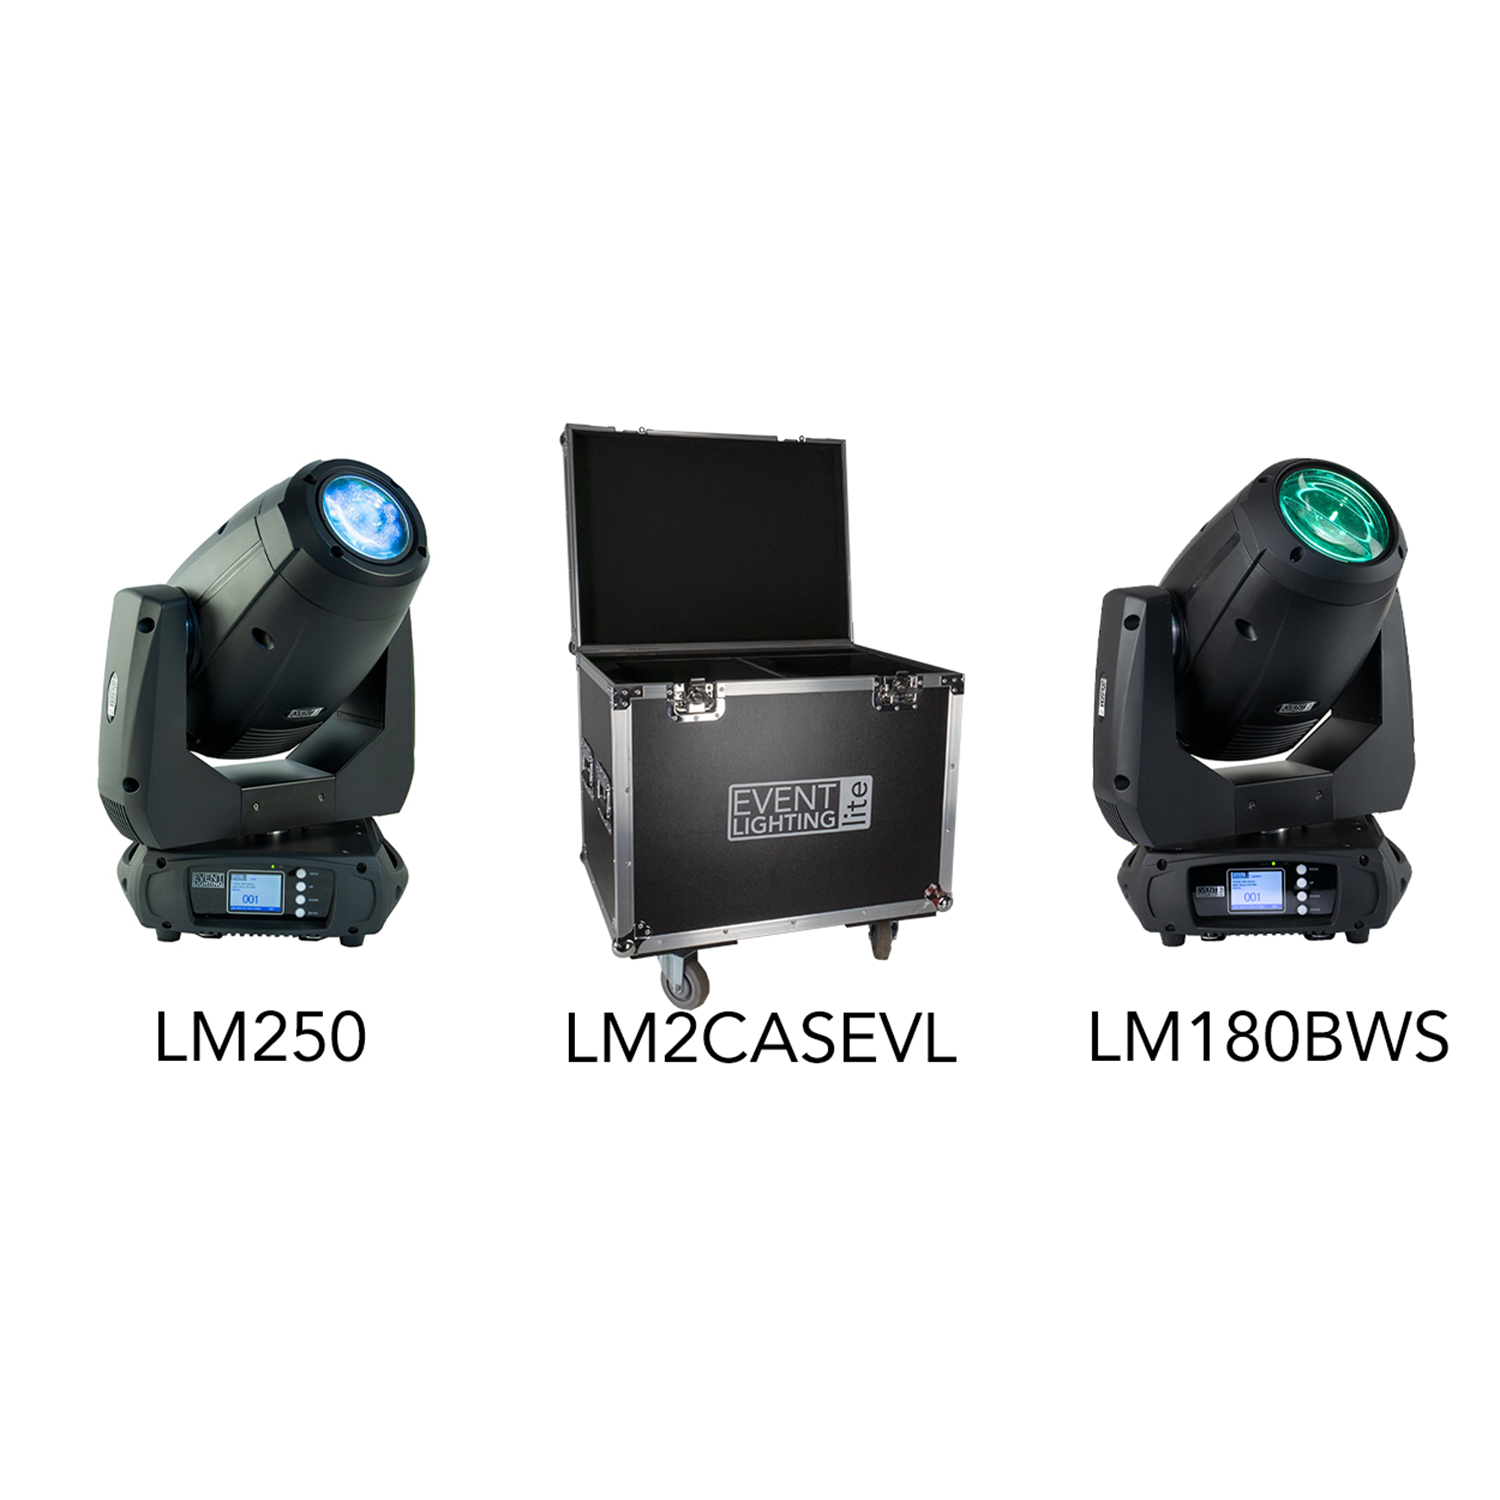 LM250, LM180BWS and LM2CASEVL Just Landed!